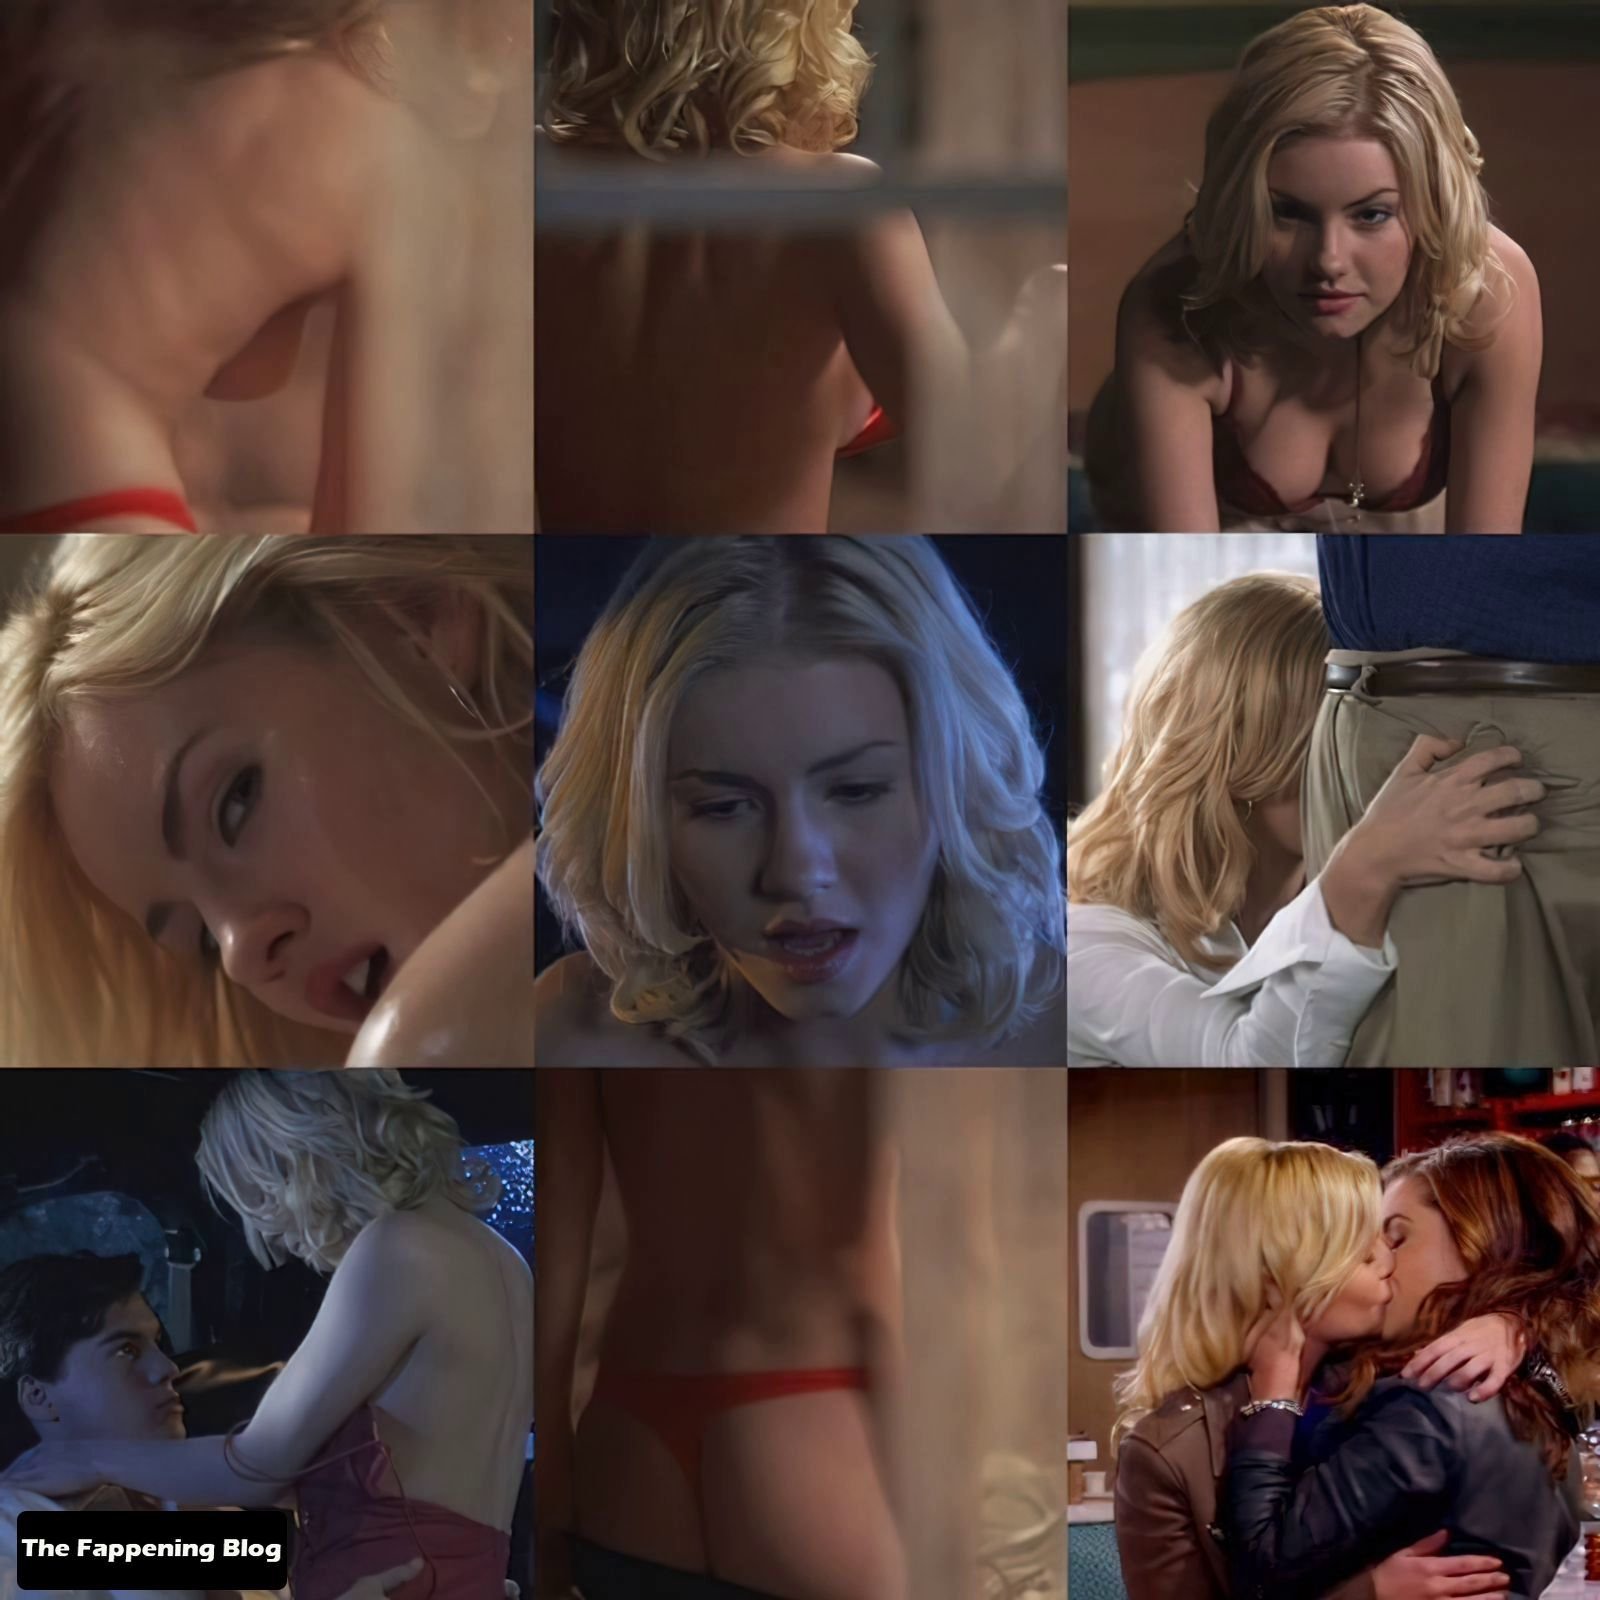 barbara beech recommends elisha cuthbert nud pic